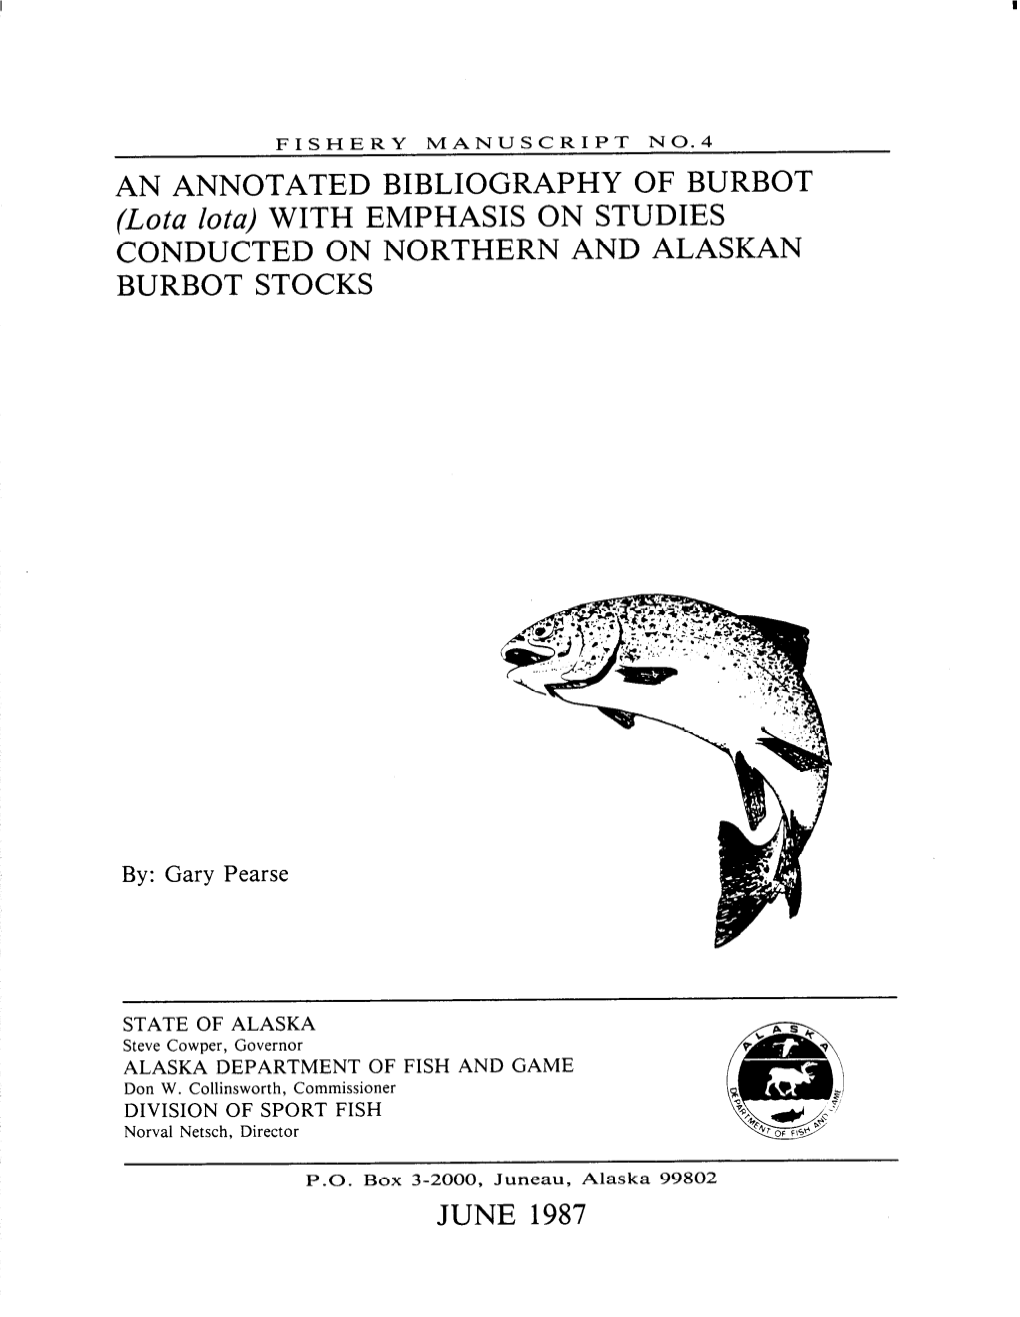 AN ANNOTATED BIBLIOGRAPHY of BURBOT (Lota Zota) with EMPHASIS on STUDIES CONDUCTED on NORTHERN and ALASKAN BURBOT STOCKS